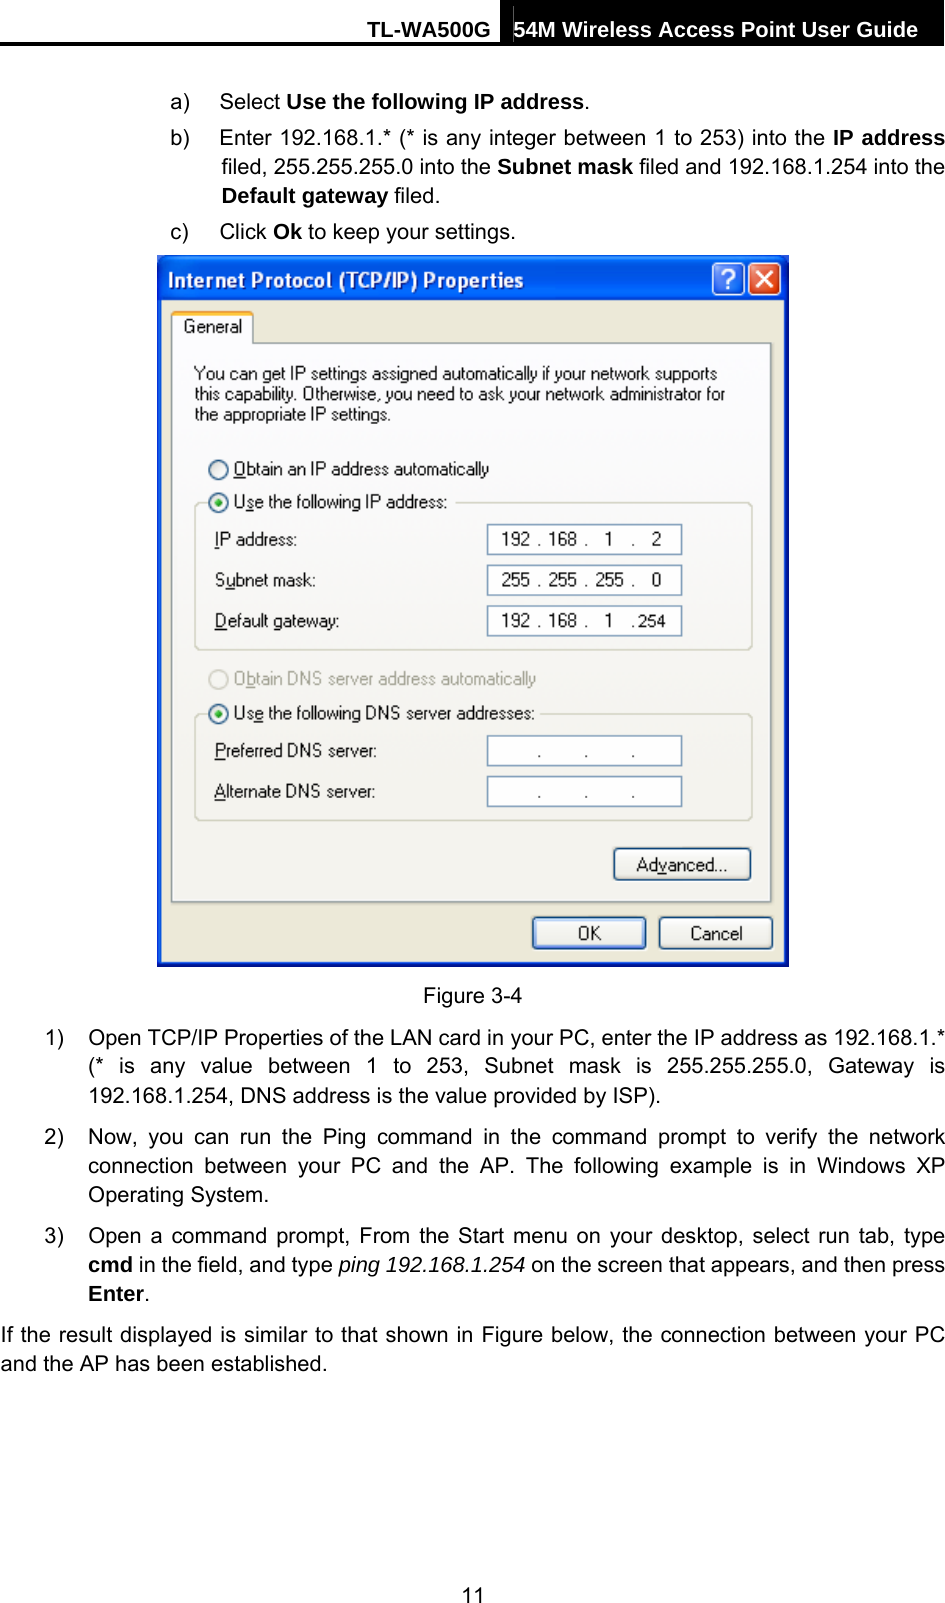 TL-WA500G 54M Wireless Access Point User Guide  a) Select Use the following IP address. b)  Enter 192.168.1.* (* is any integer between 1 to 253) into the IP address filed, 255.255.255.0 into the Subnet mask filed and 192.168.1.254 into the Default gateway filed. c) Click Ok to keep your settings.  Figure 3-4 1)  Open TCP/IP Properties of the LAN card in your PC, enter the IP address as 192.168.1.* (* is any value between 1 to 253, Subnet mask is 255.255.255.0, Gateway is 192.168.1.254, DNS address is the value provided by ISP). 2)  Now, you can run the Ping command in the command prompt to verify the network connection between your PC and the AP. The following example is in Windows XP Operating System. 3)  Open a command prompt, From the Start menu on your desktop, select run tab, type cmd in the field, and type ping 192.168.1.254 on the screen that appears, and then press Enter. If the result displayed is similar to that shown in Figure below, the connection between your PC and the AP has been established. 11 